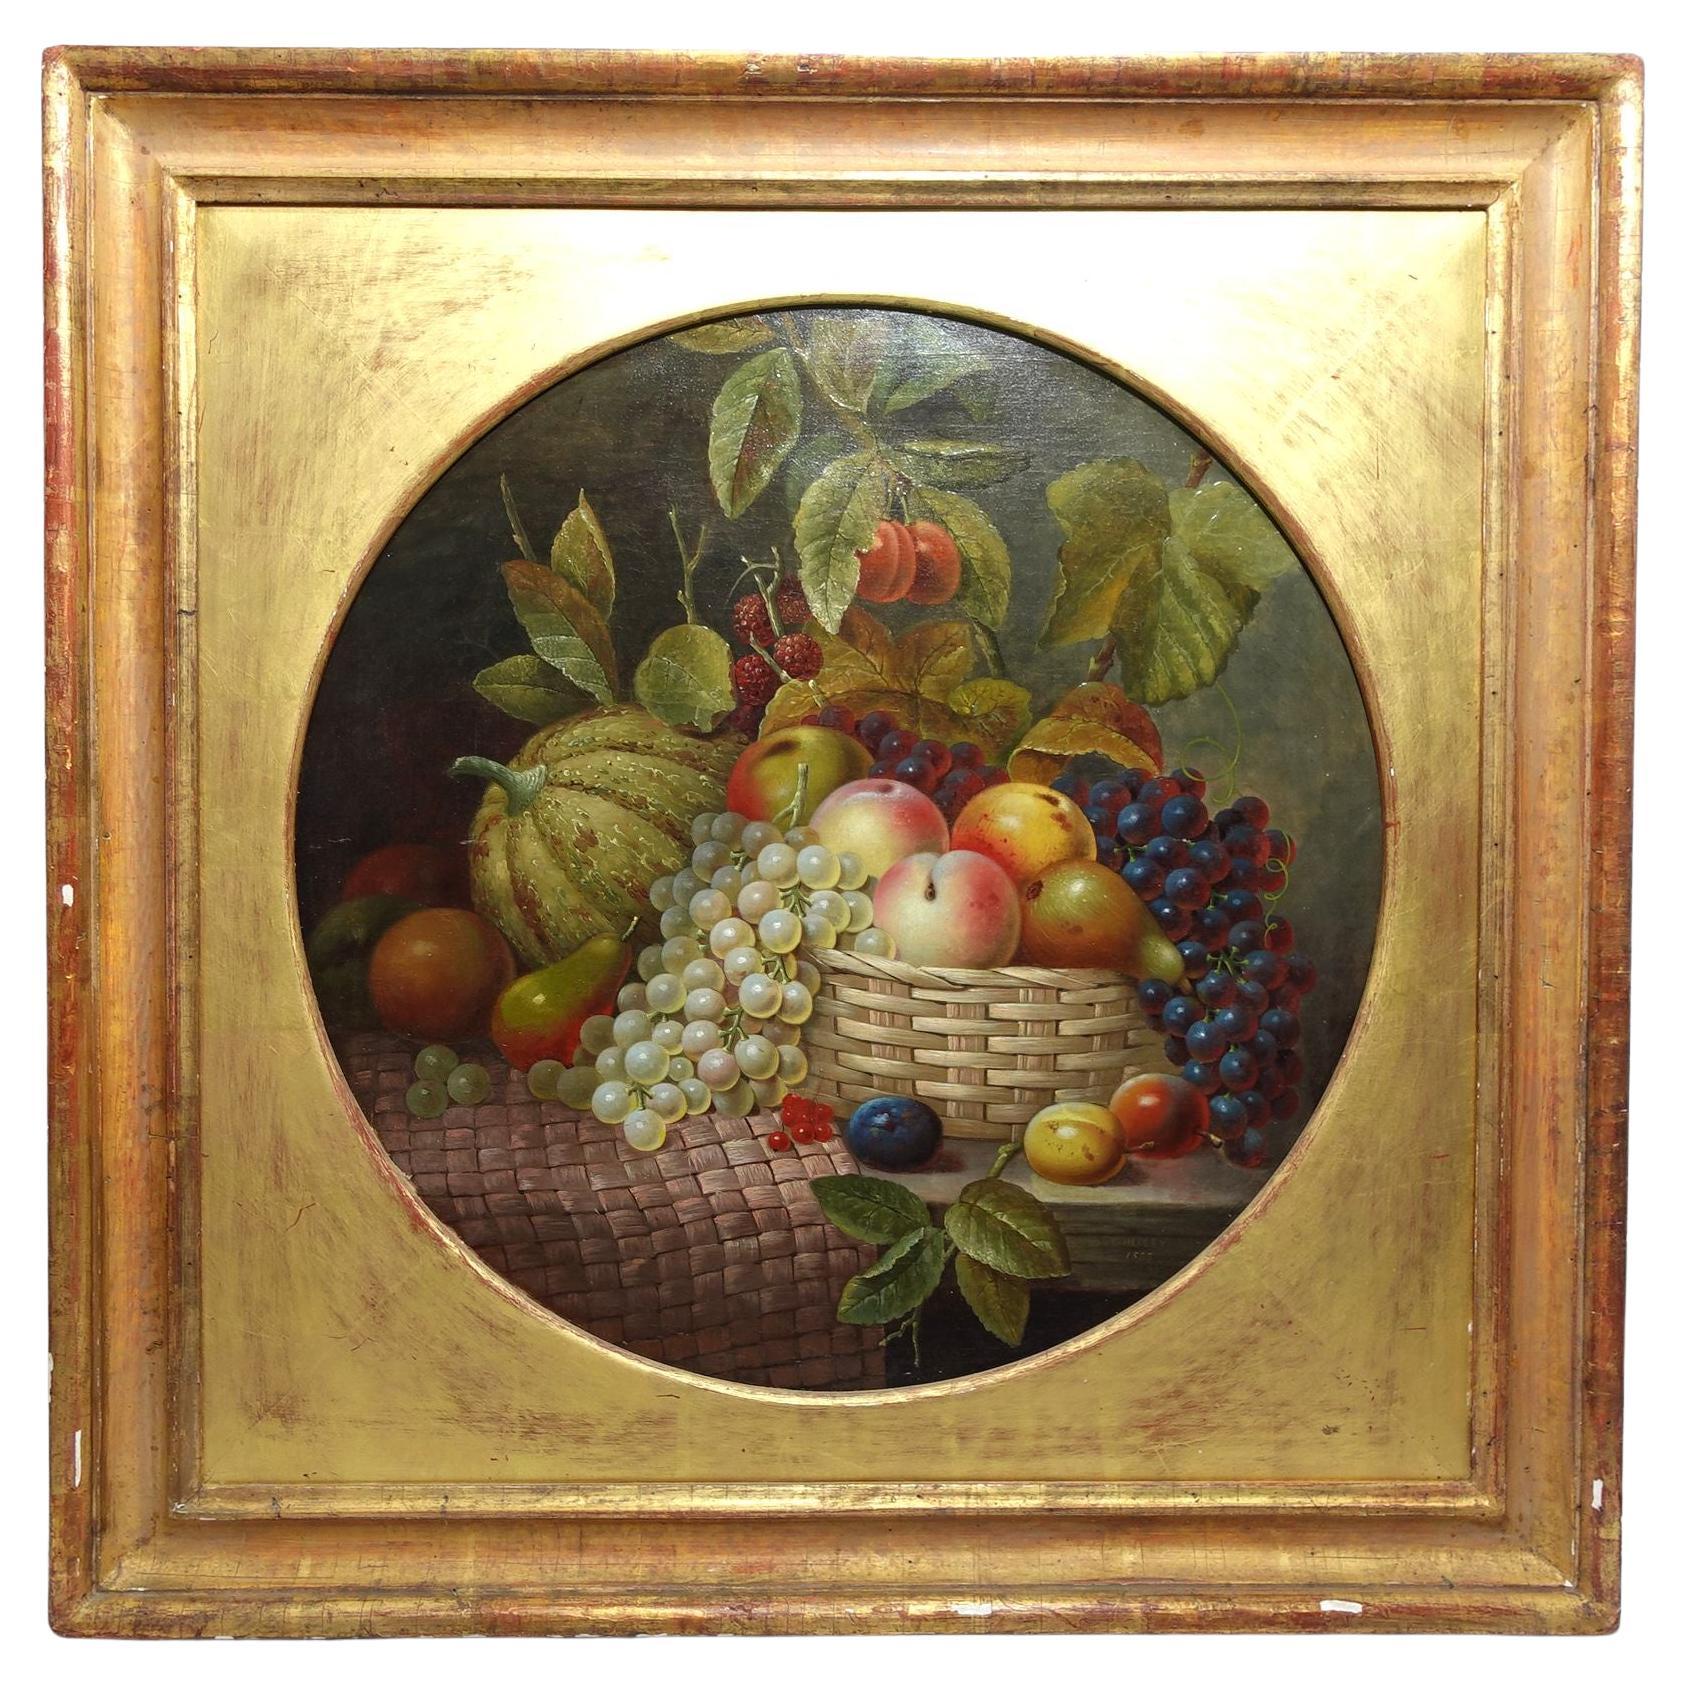 Oil Painting, "Still Life with Fruit", by George Hedley, 1855